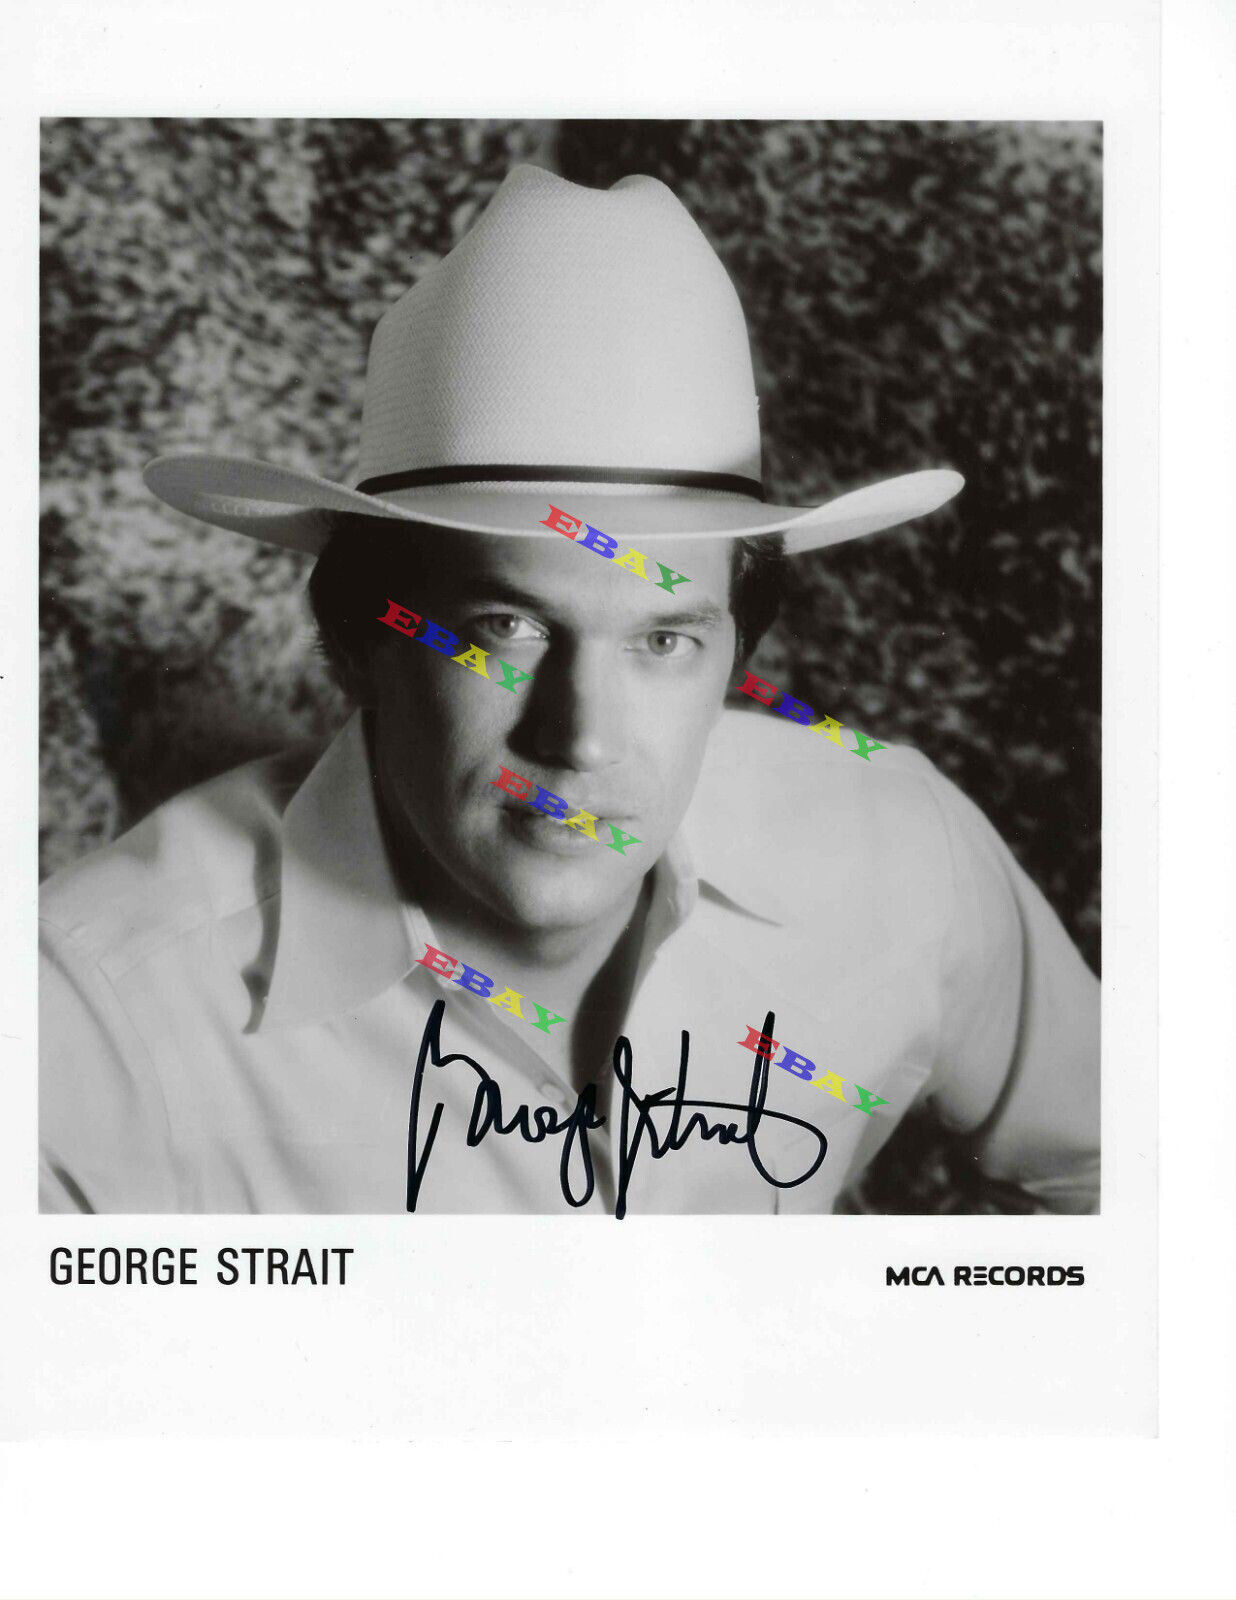 GEORGE STRAIT Autographed signed 8x10 Photo Poster painting Reprint